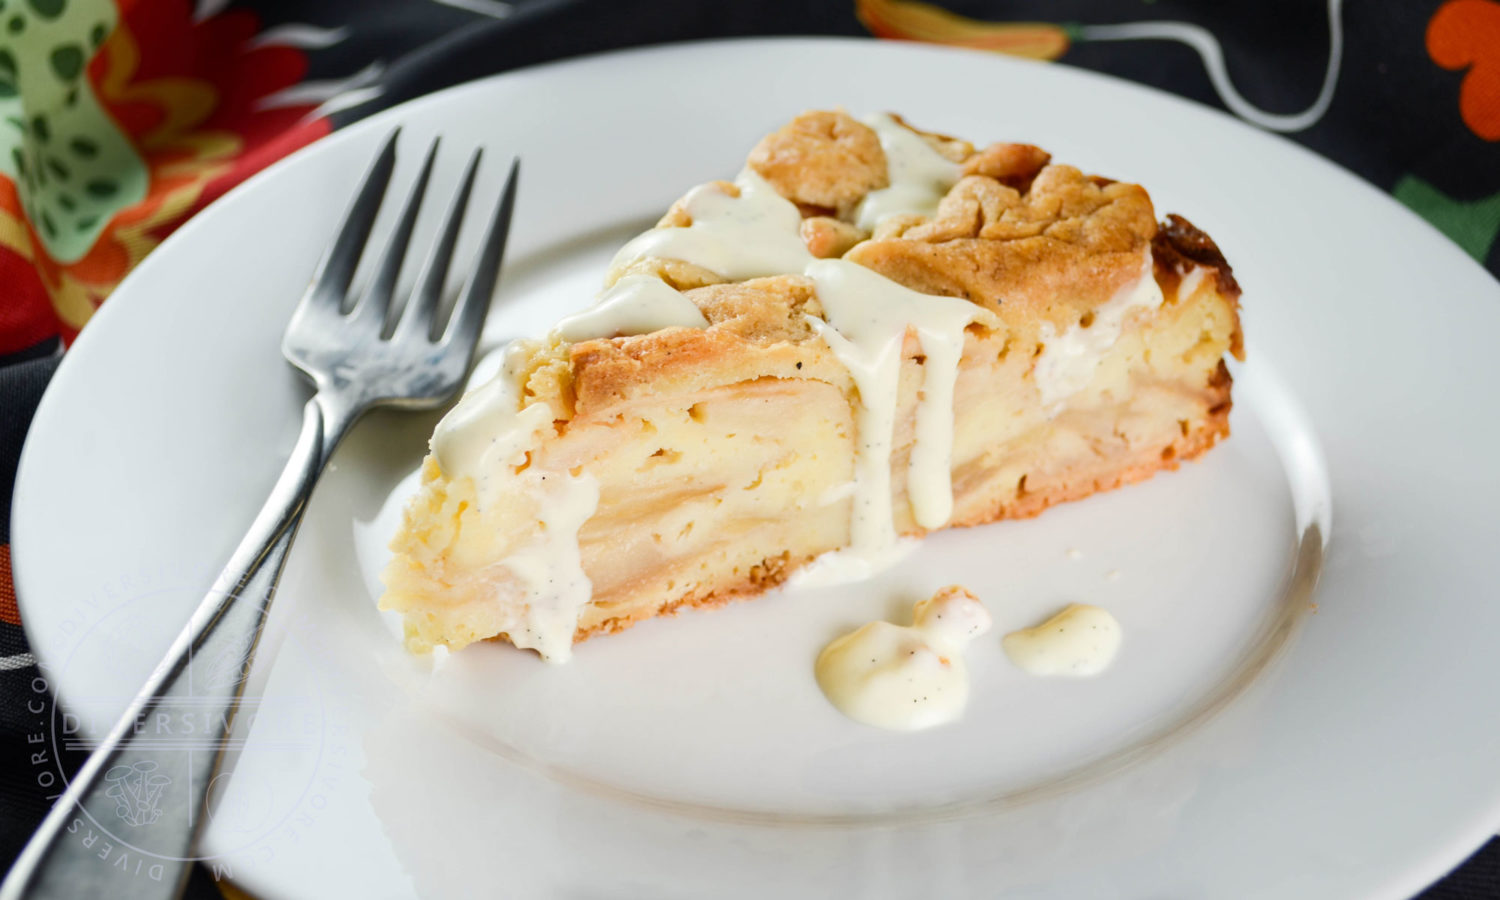 Swedish Apple Cake (or Swedish Apple Pie) - a simple pie crust bottom, apple and almond filling, and deliciously simple vanilla sauce - Diversivore.com